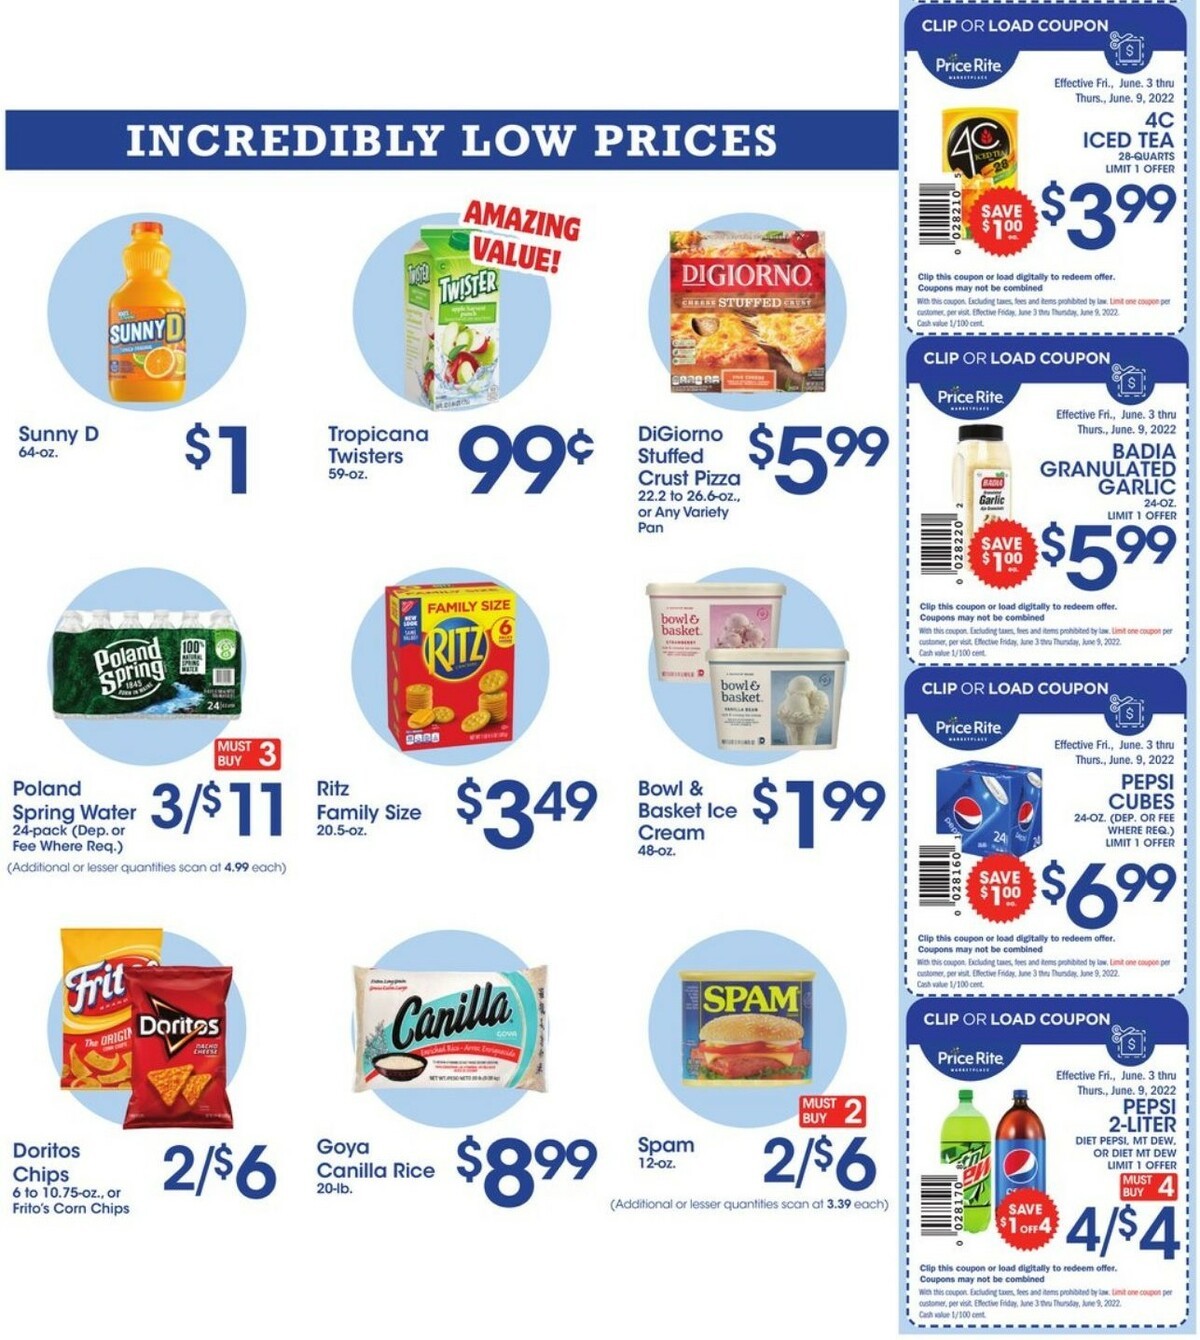 Price Rite Weekly Ad from June 3